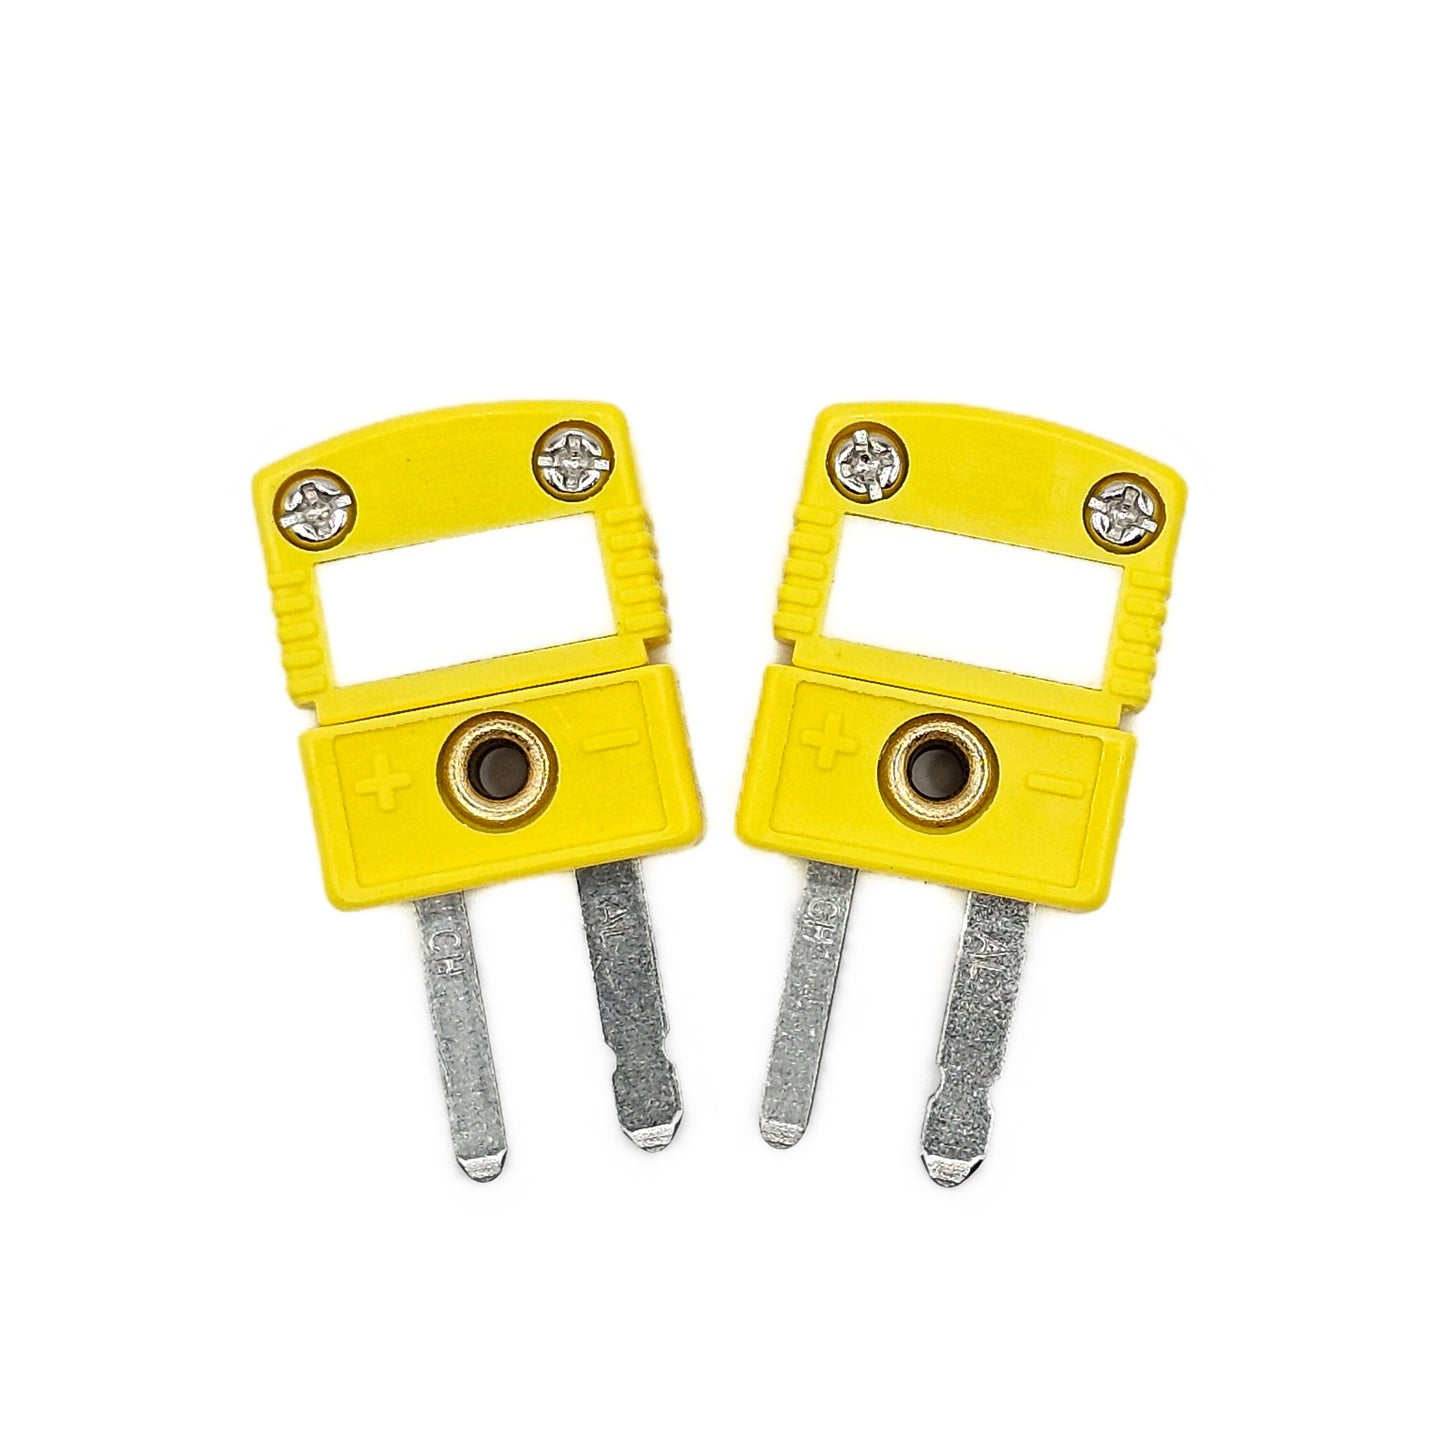 Type K Miniature Thermocouple Connector Pair